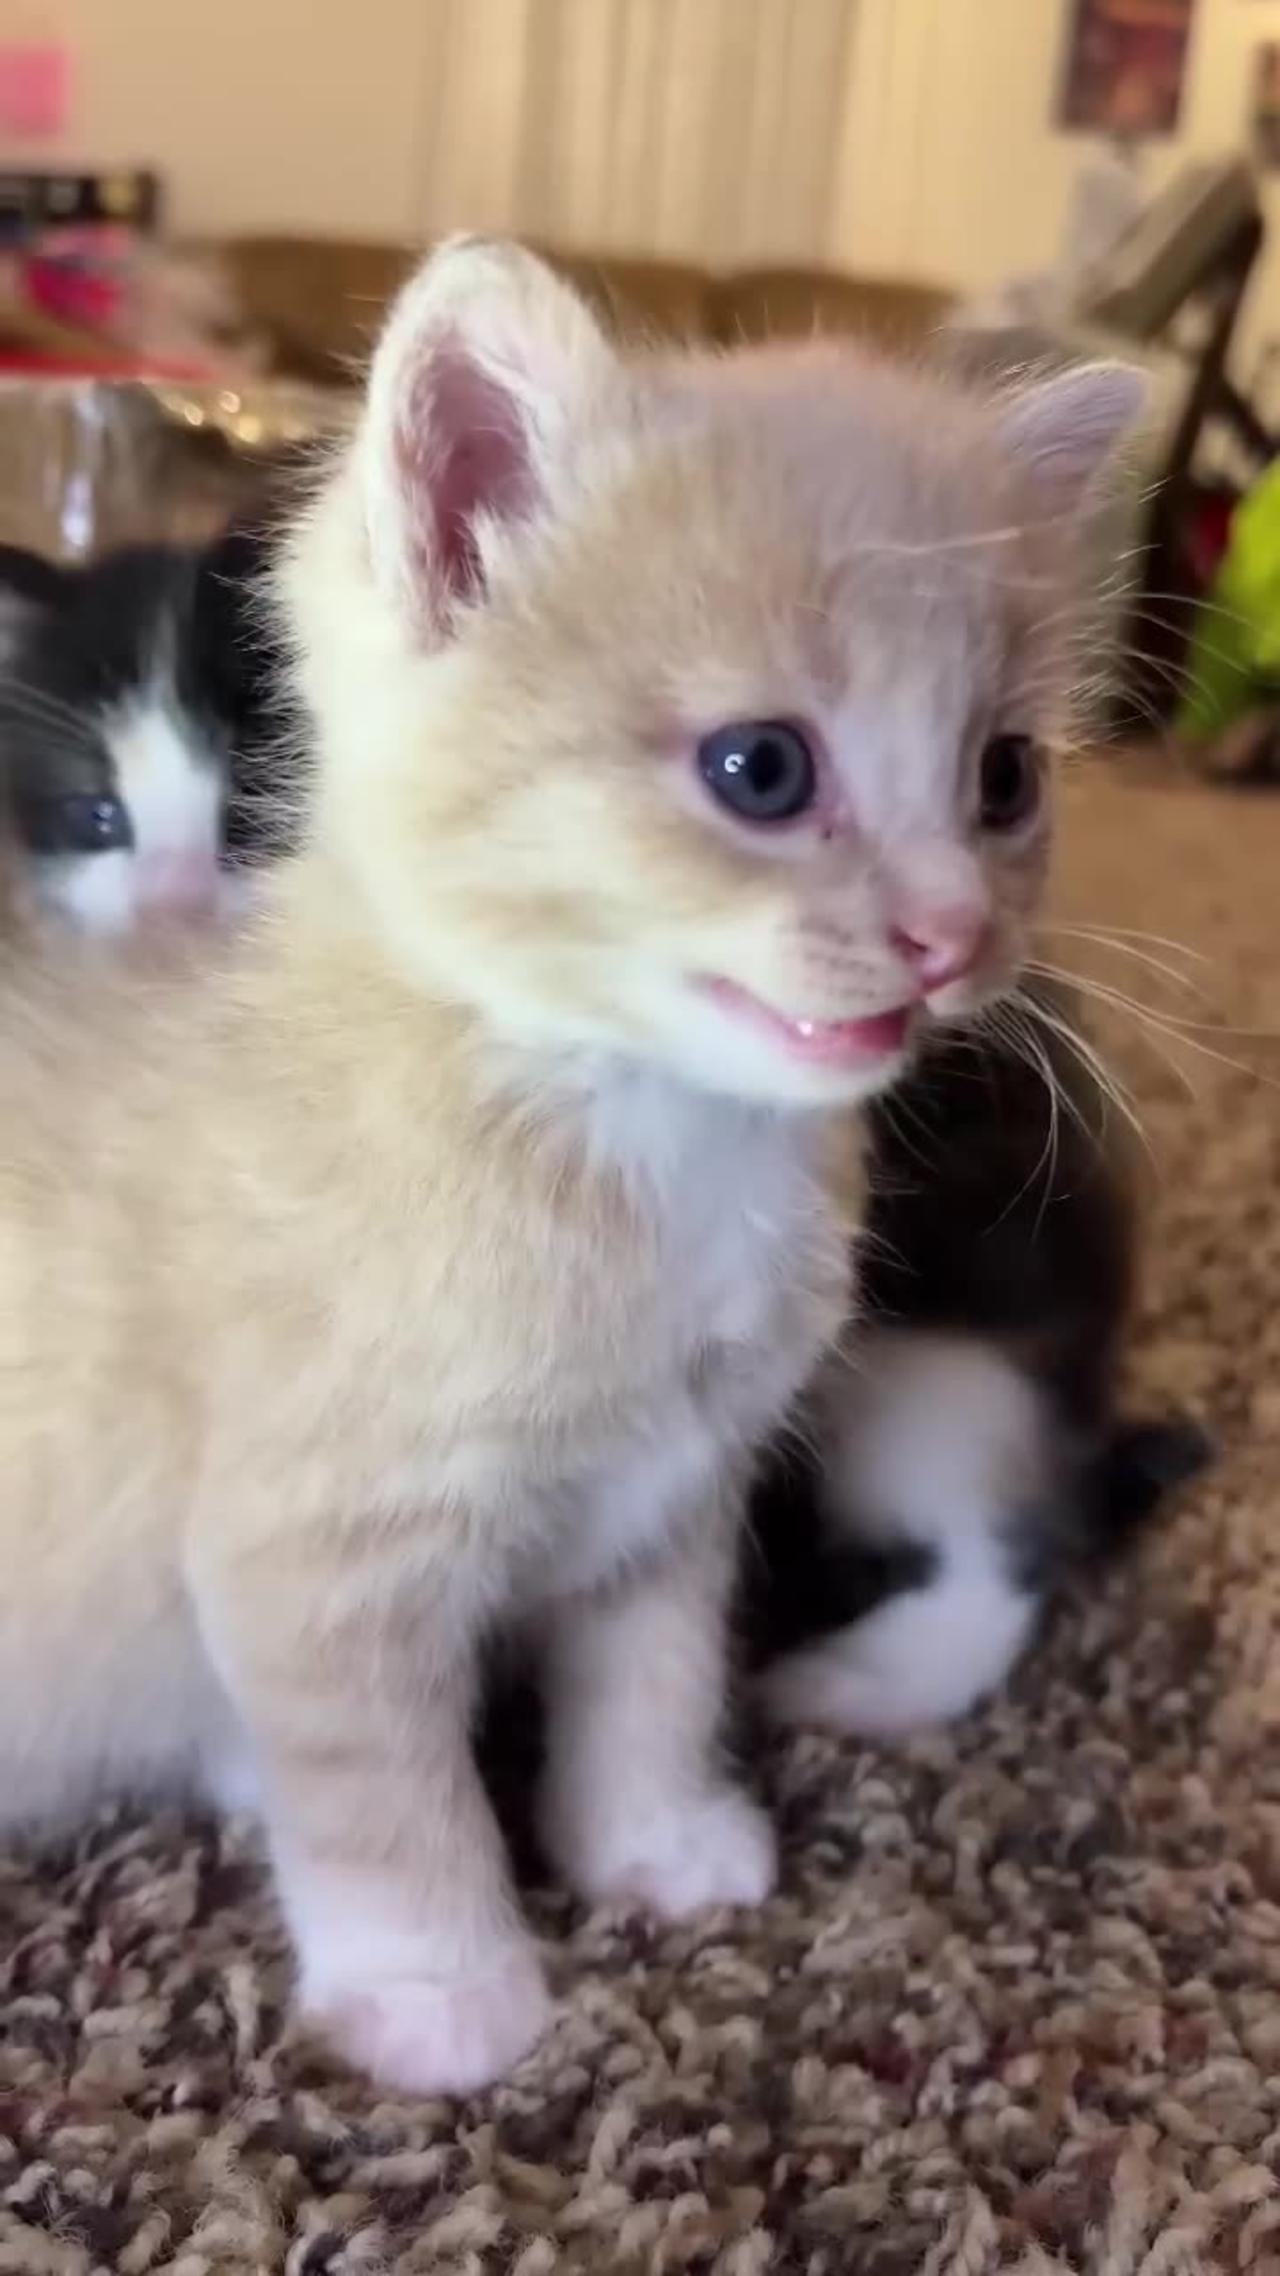 Kitten meows. (Play this to make your cat go crazy).